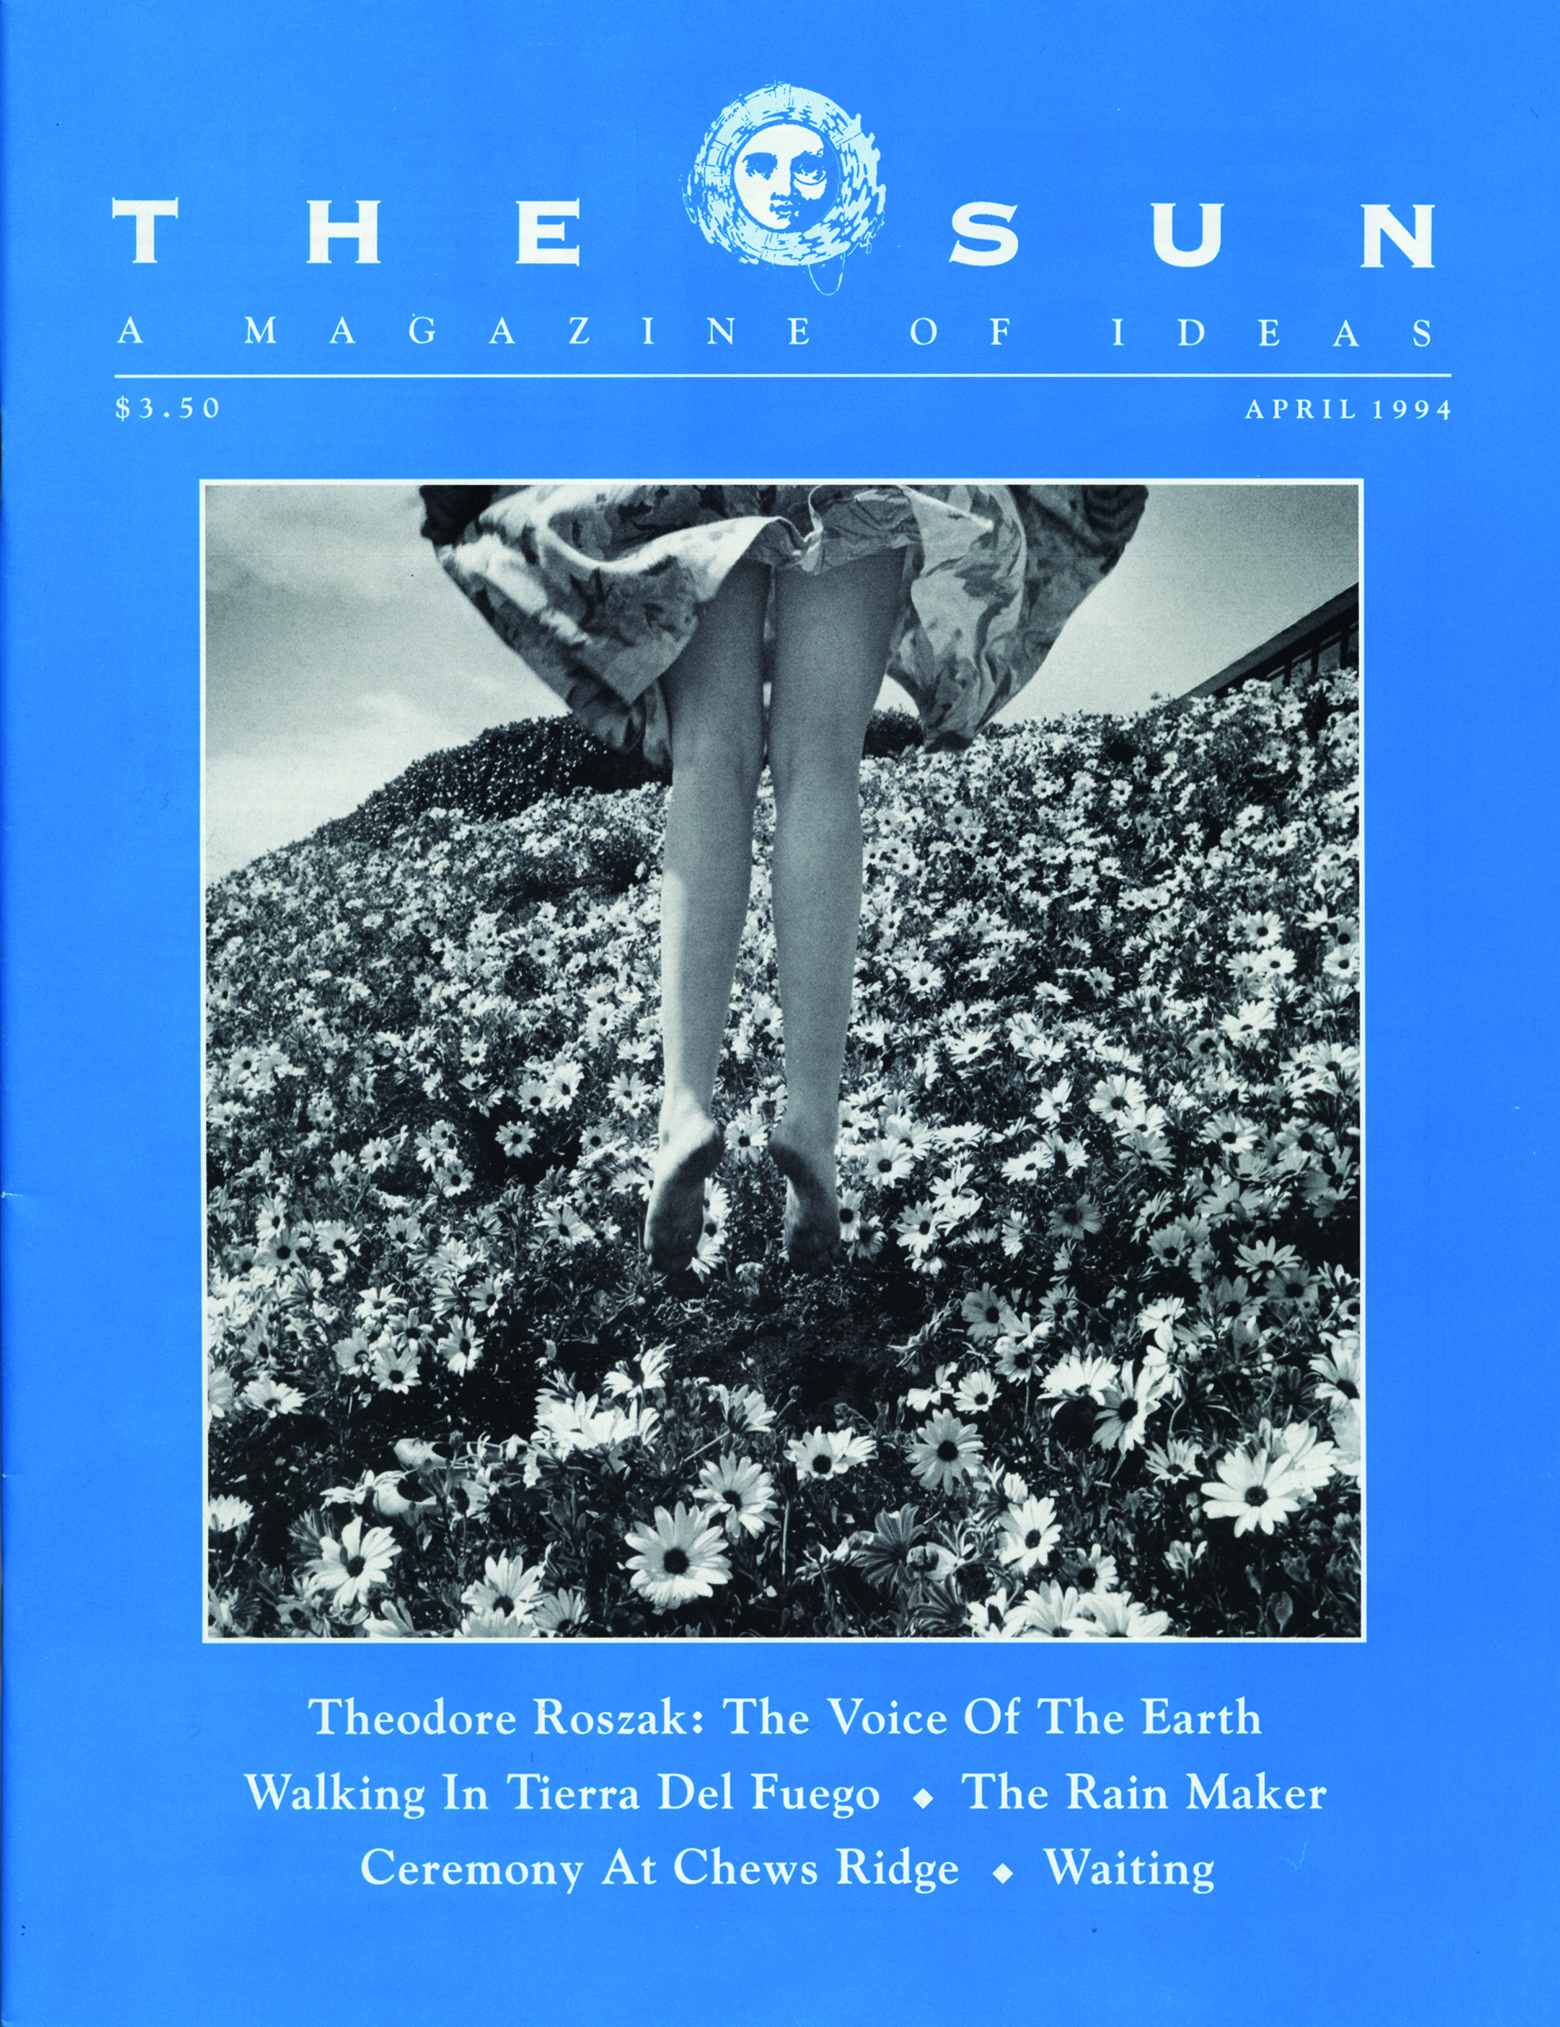 April 1994 cover of The Sun. A charming image of a pair of girl’s legs jumping over a field of flowers.